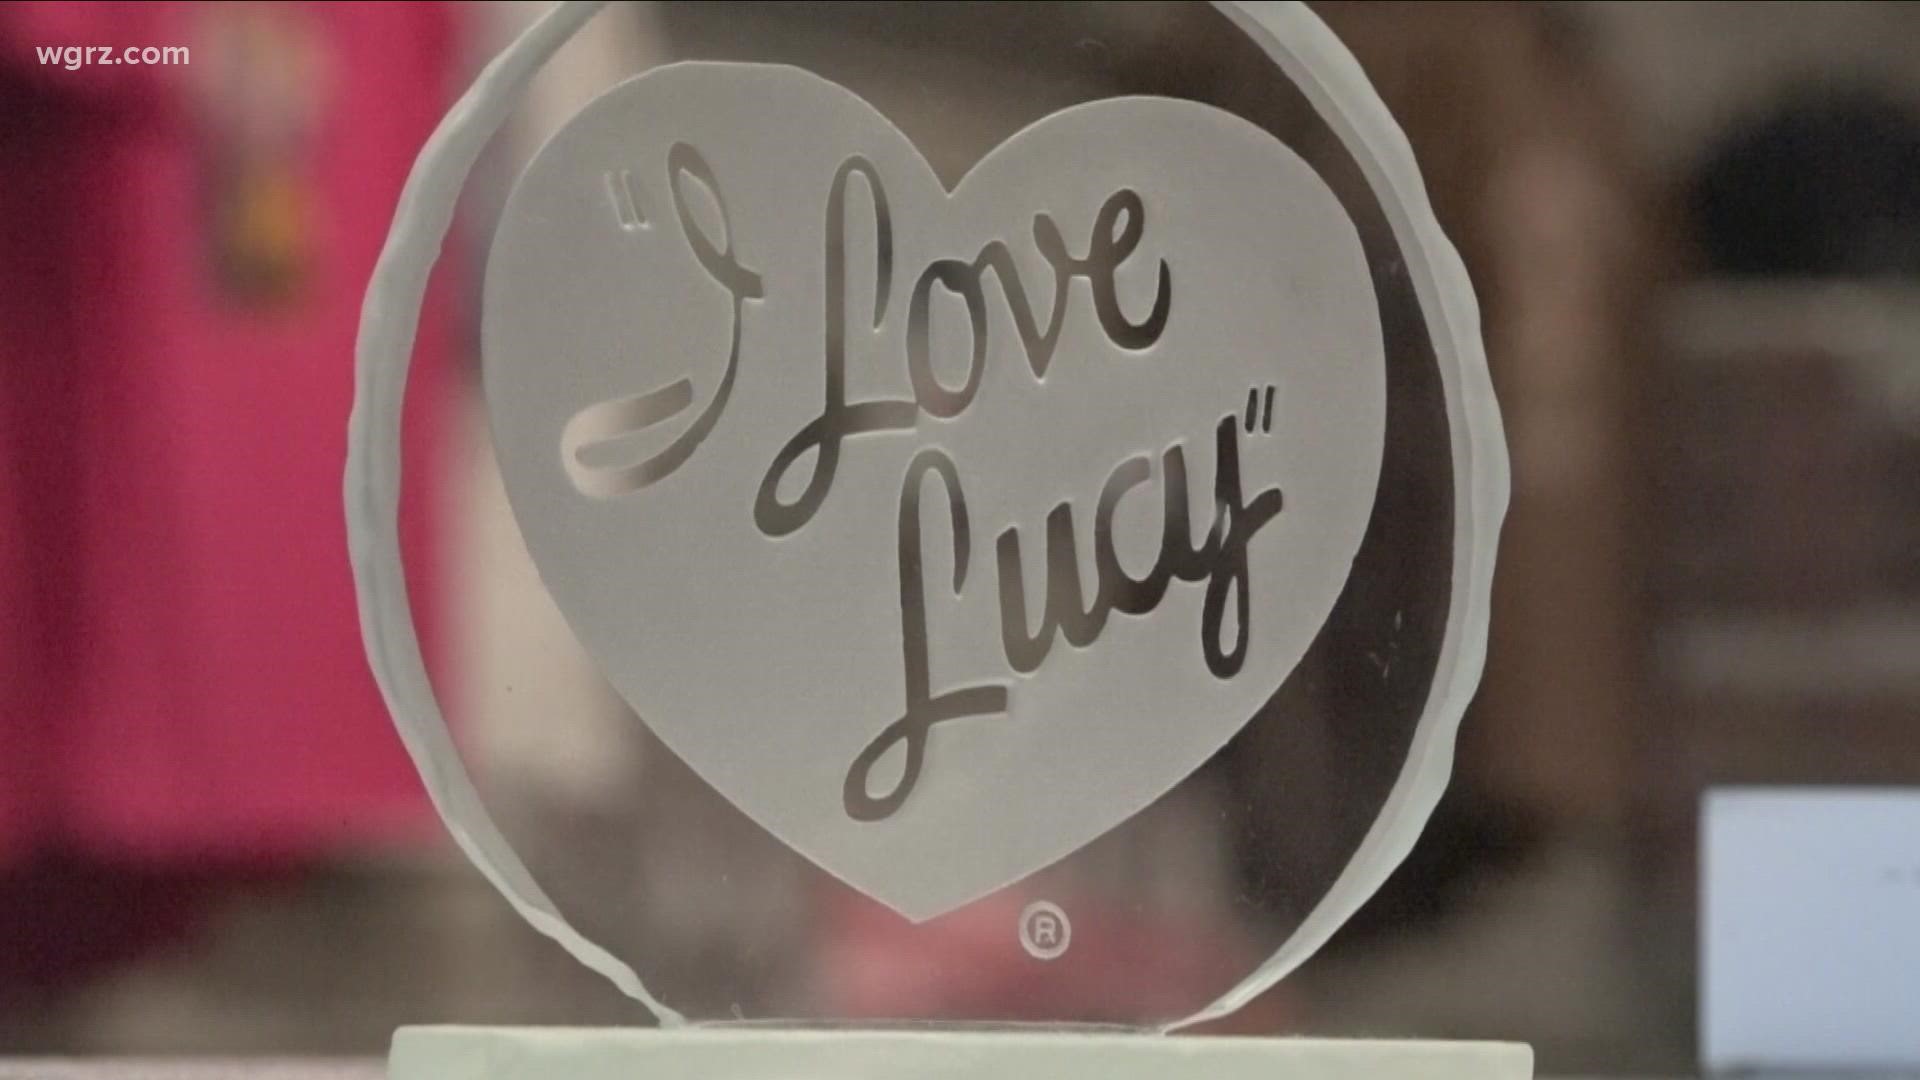 Friday marked the 70th anniversary of the premiere of the classic show "I Love Lucy."